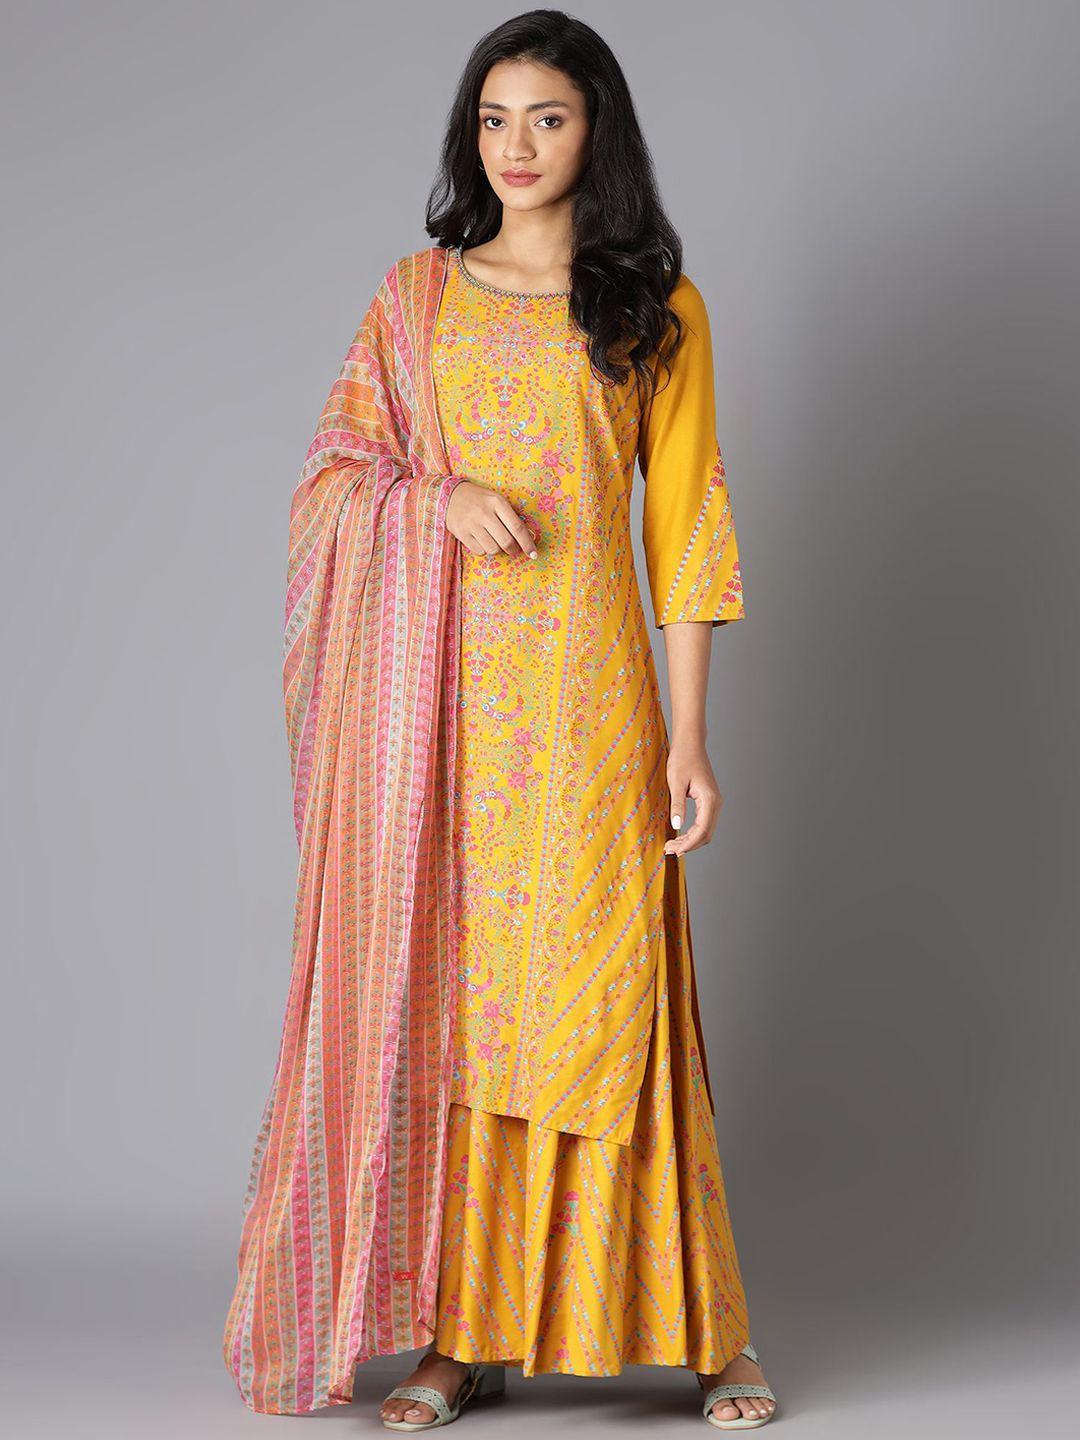 w women yellow ethnic motifs embroidered beads and stones kurta with skirt & with dupatta